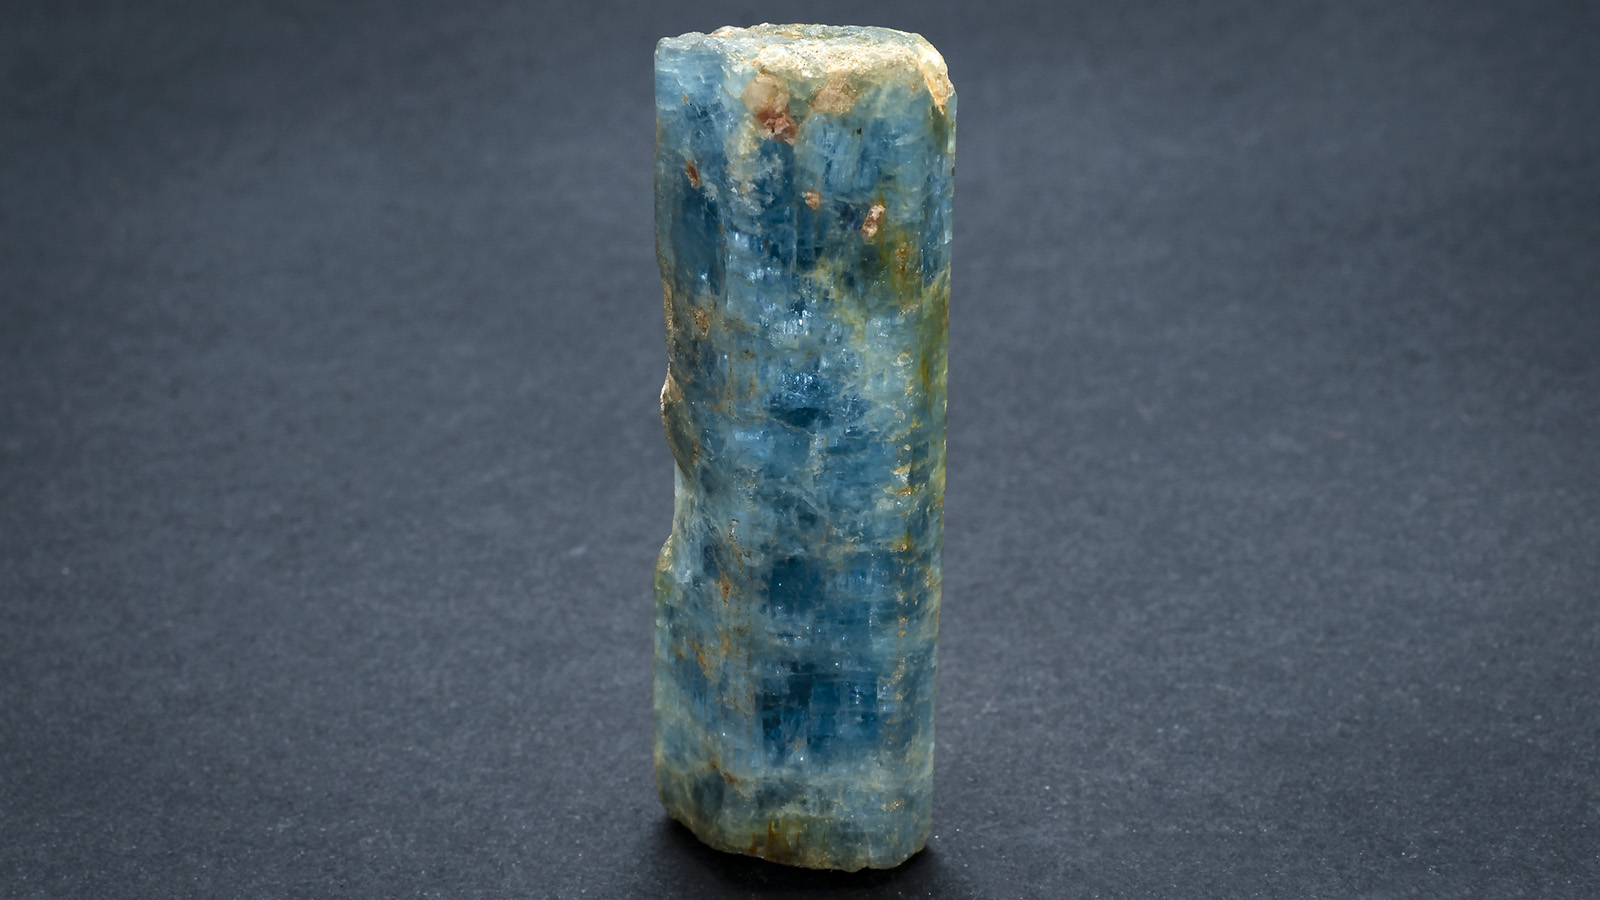 Piece of blue Beryl a mineral composed of beryllium